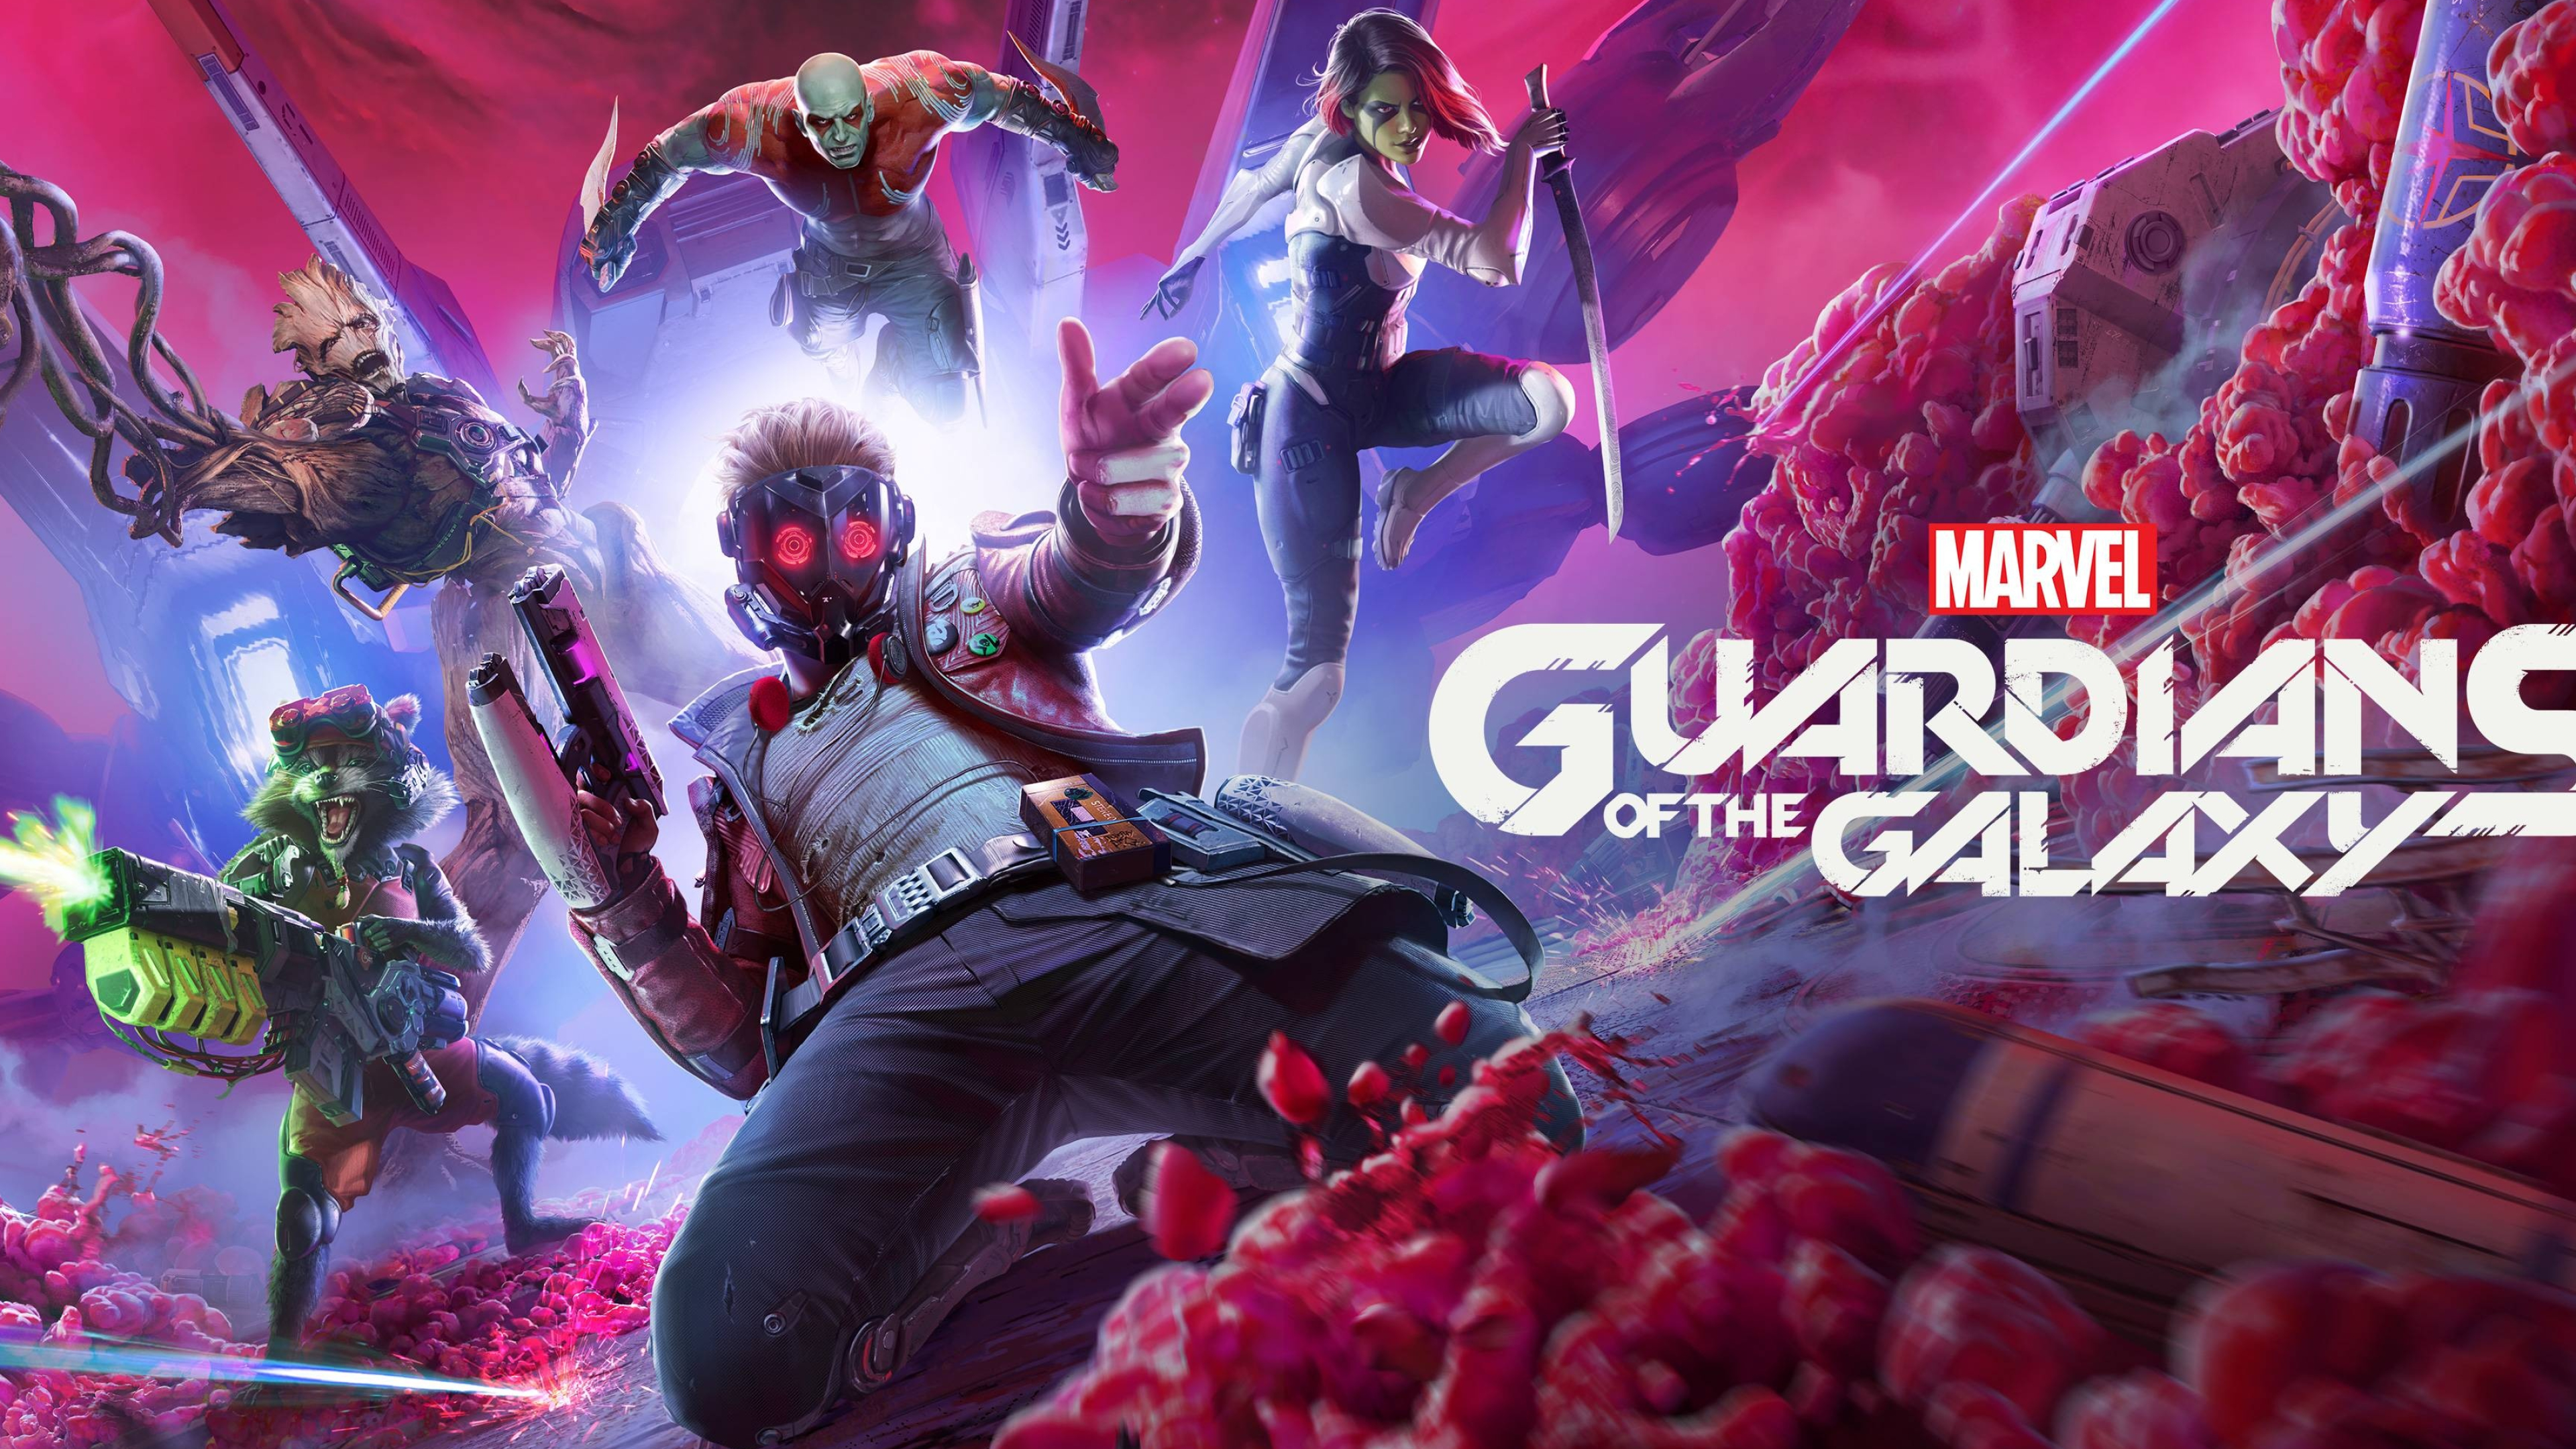 Guardians of the Galaxy, Top wallpapers, Free backgrounds, 3840x2160 4K Desktop